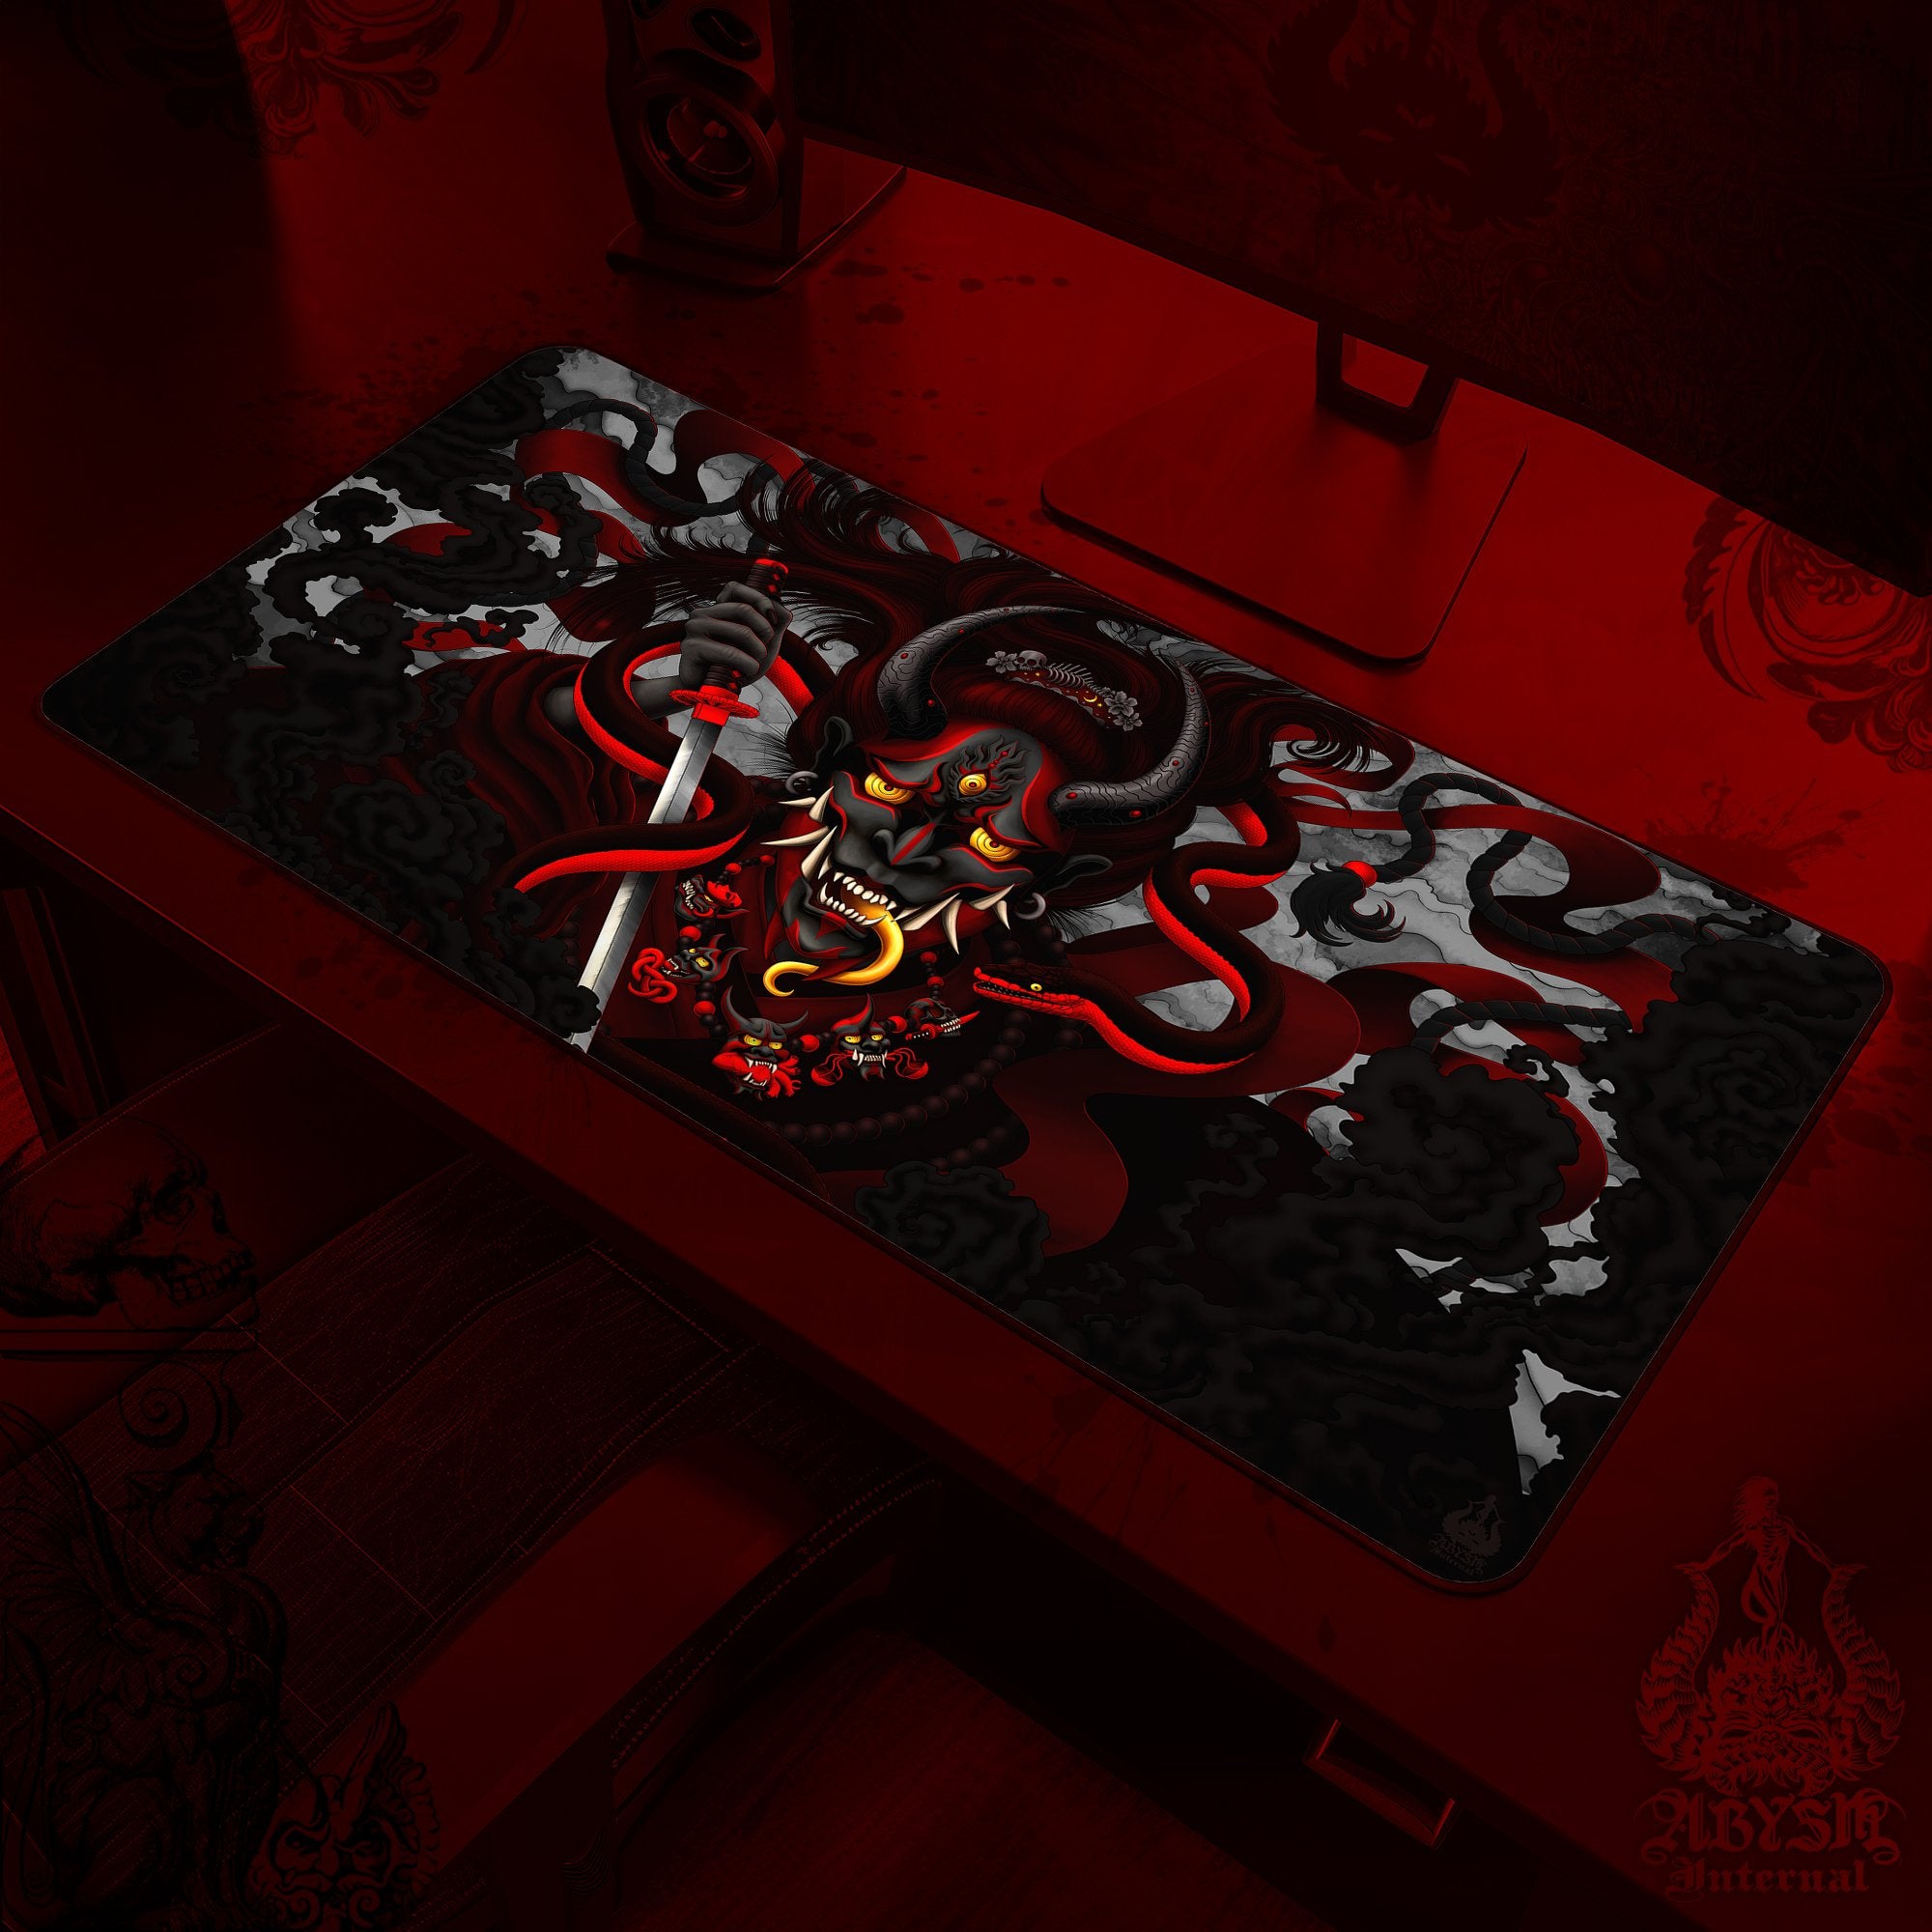 Youkai Gaming Mouse Pad, Japanese Demon Desk Mat, Hannya Table Protector Cover, Gothic Workpad, Fantasy Anime and Manga Art Print - Black Red Snake - Abysm Internal